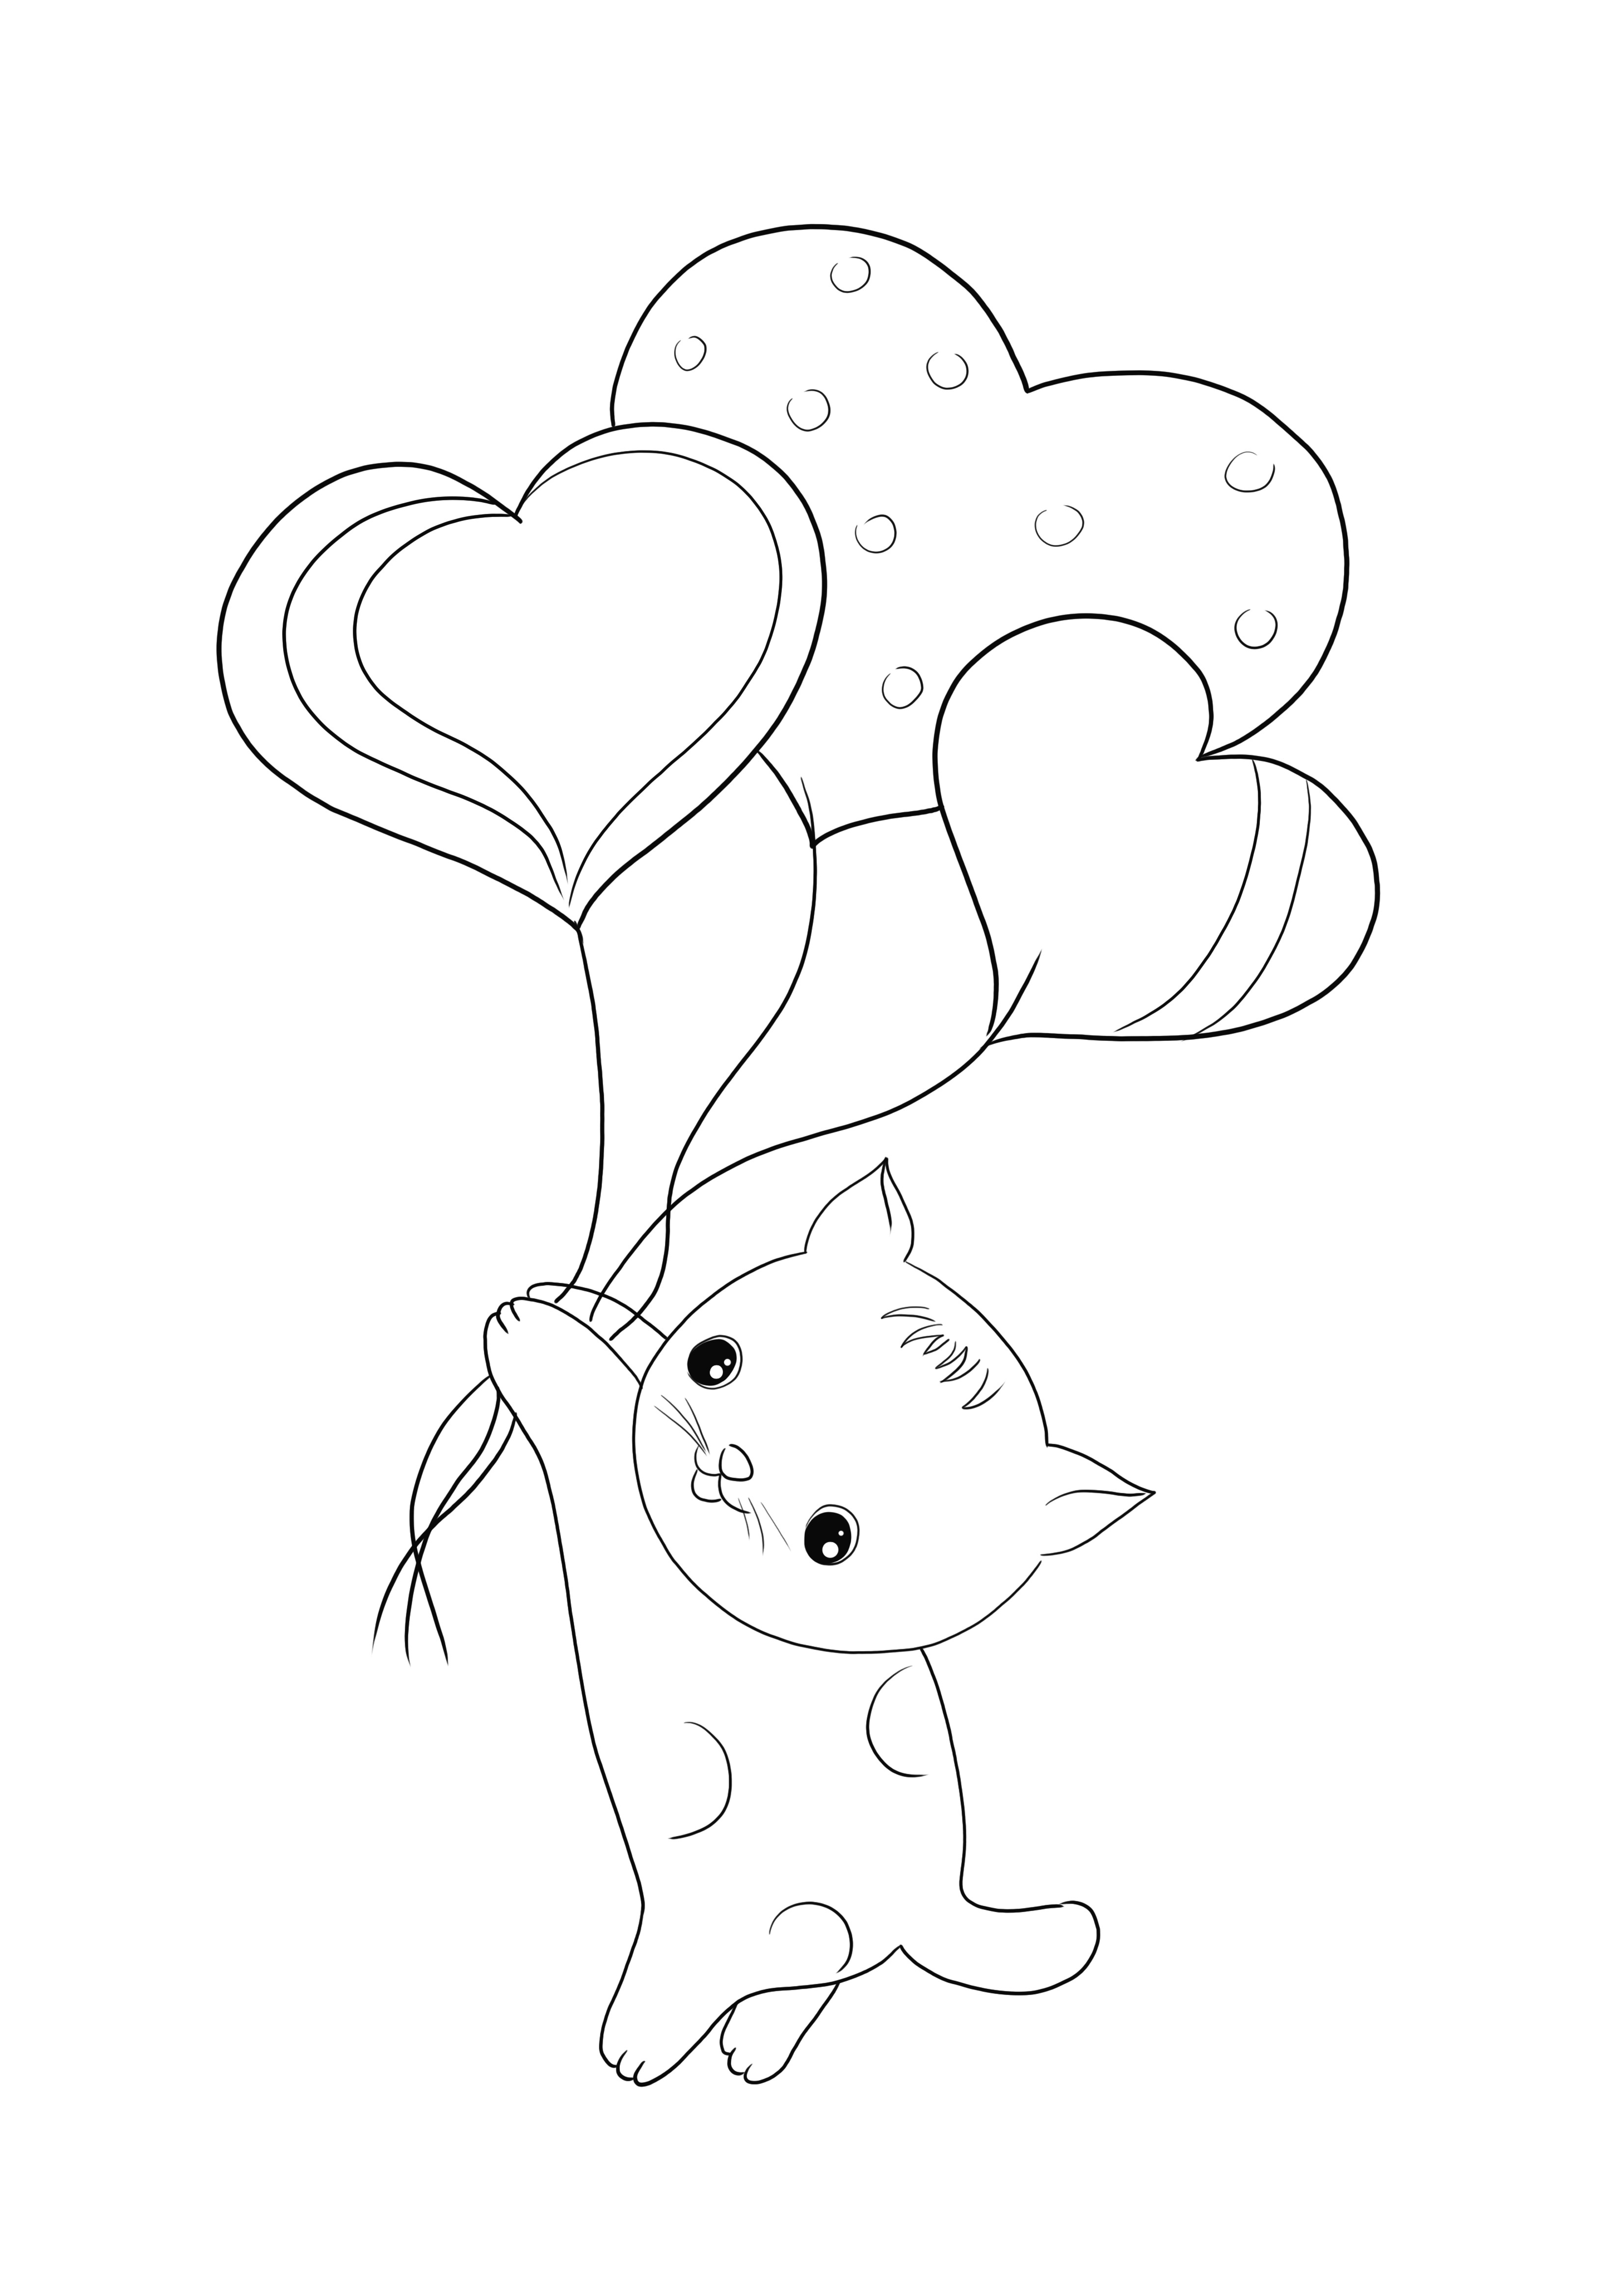 Cat with heart-shaped balloons printable for free and simple coloring image for kids